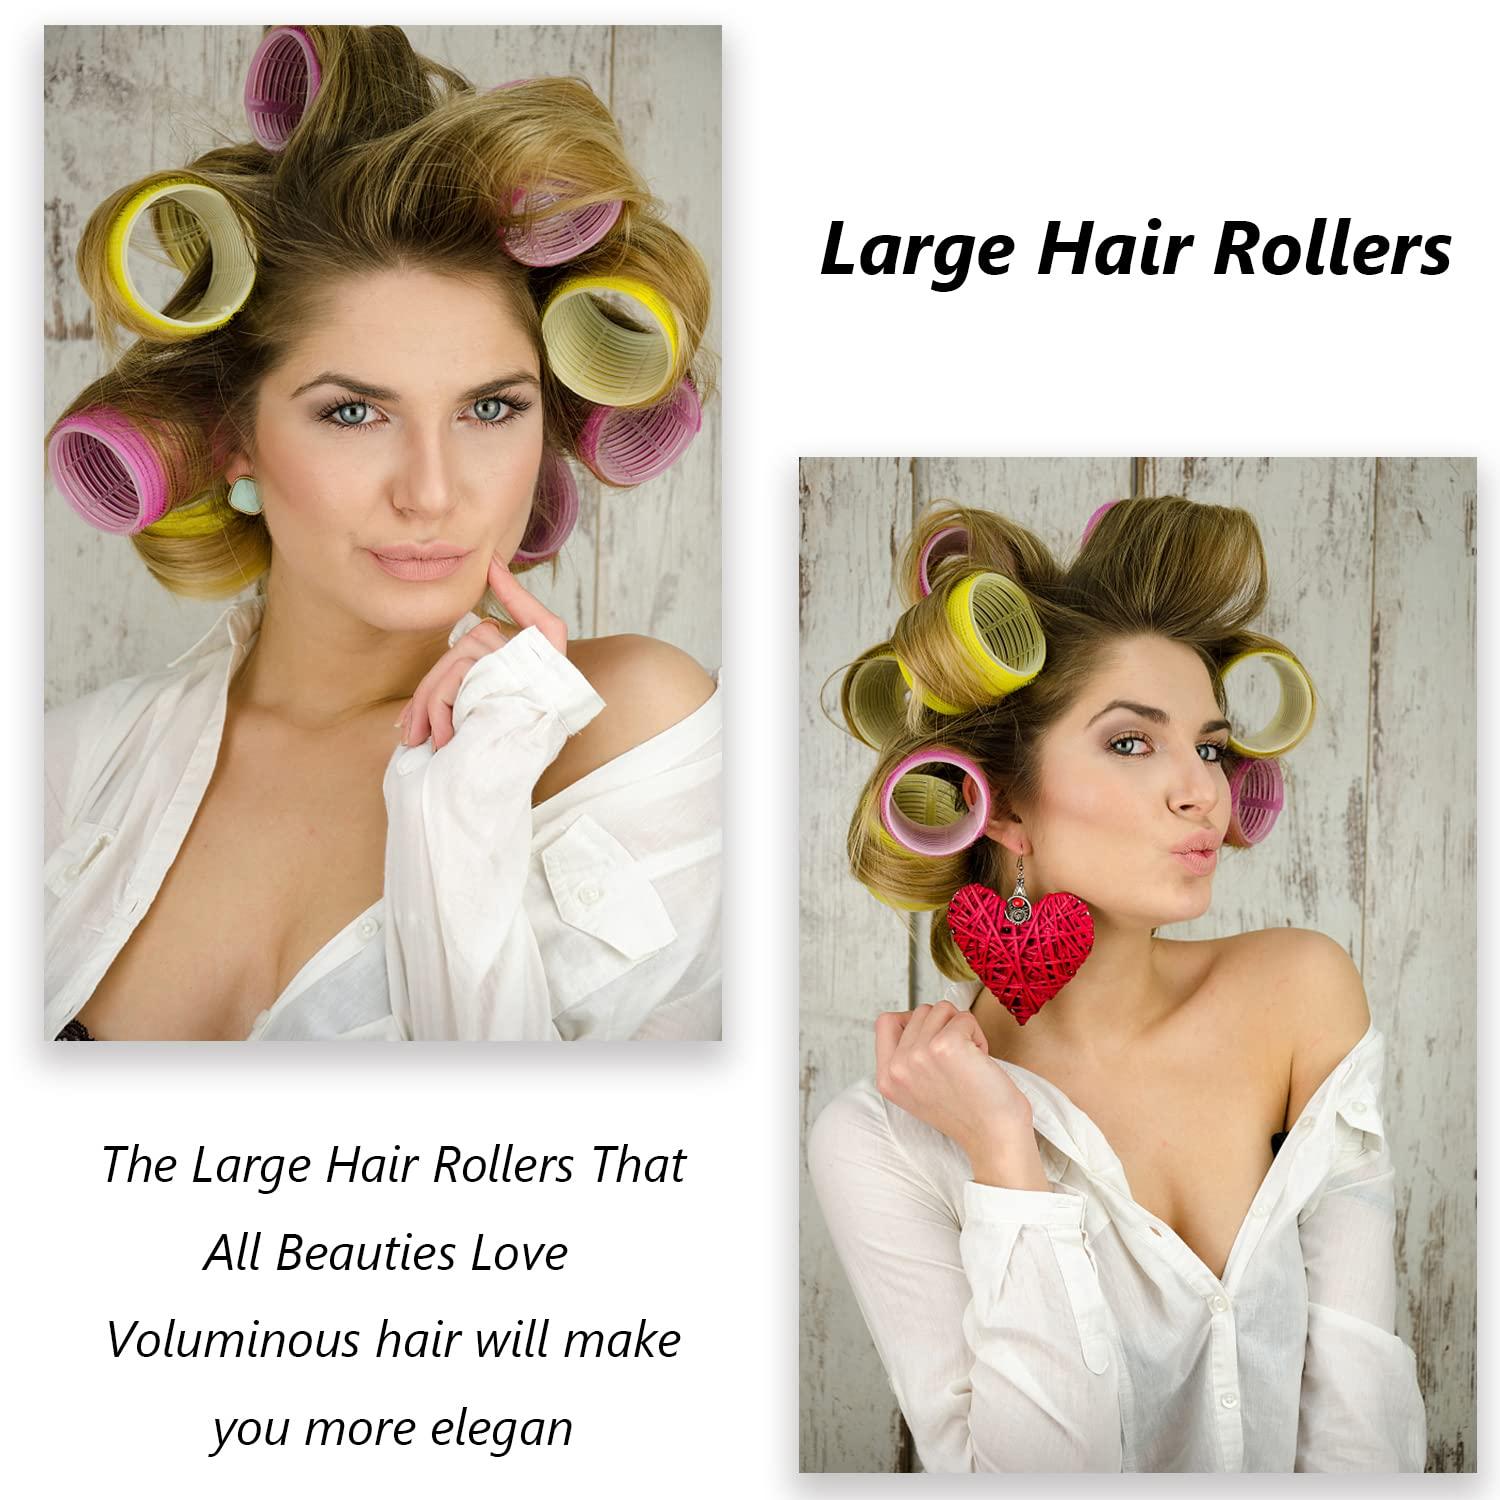 Jumbo Hair Rollers Hair Curlers. 2.5 inch Large Self Grip Hair Curlers for Long Hair, Big Hair Rollers Long Hair. No heat Curlers Hair Rollers with Clips & Comb.24 Pack Yellow-24